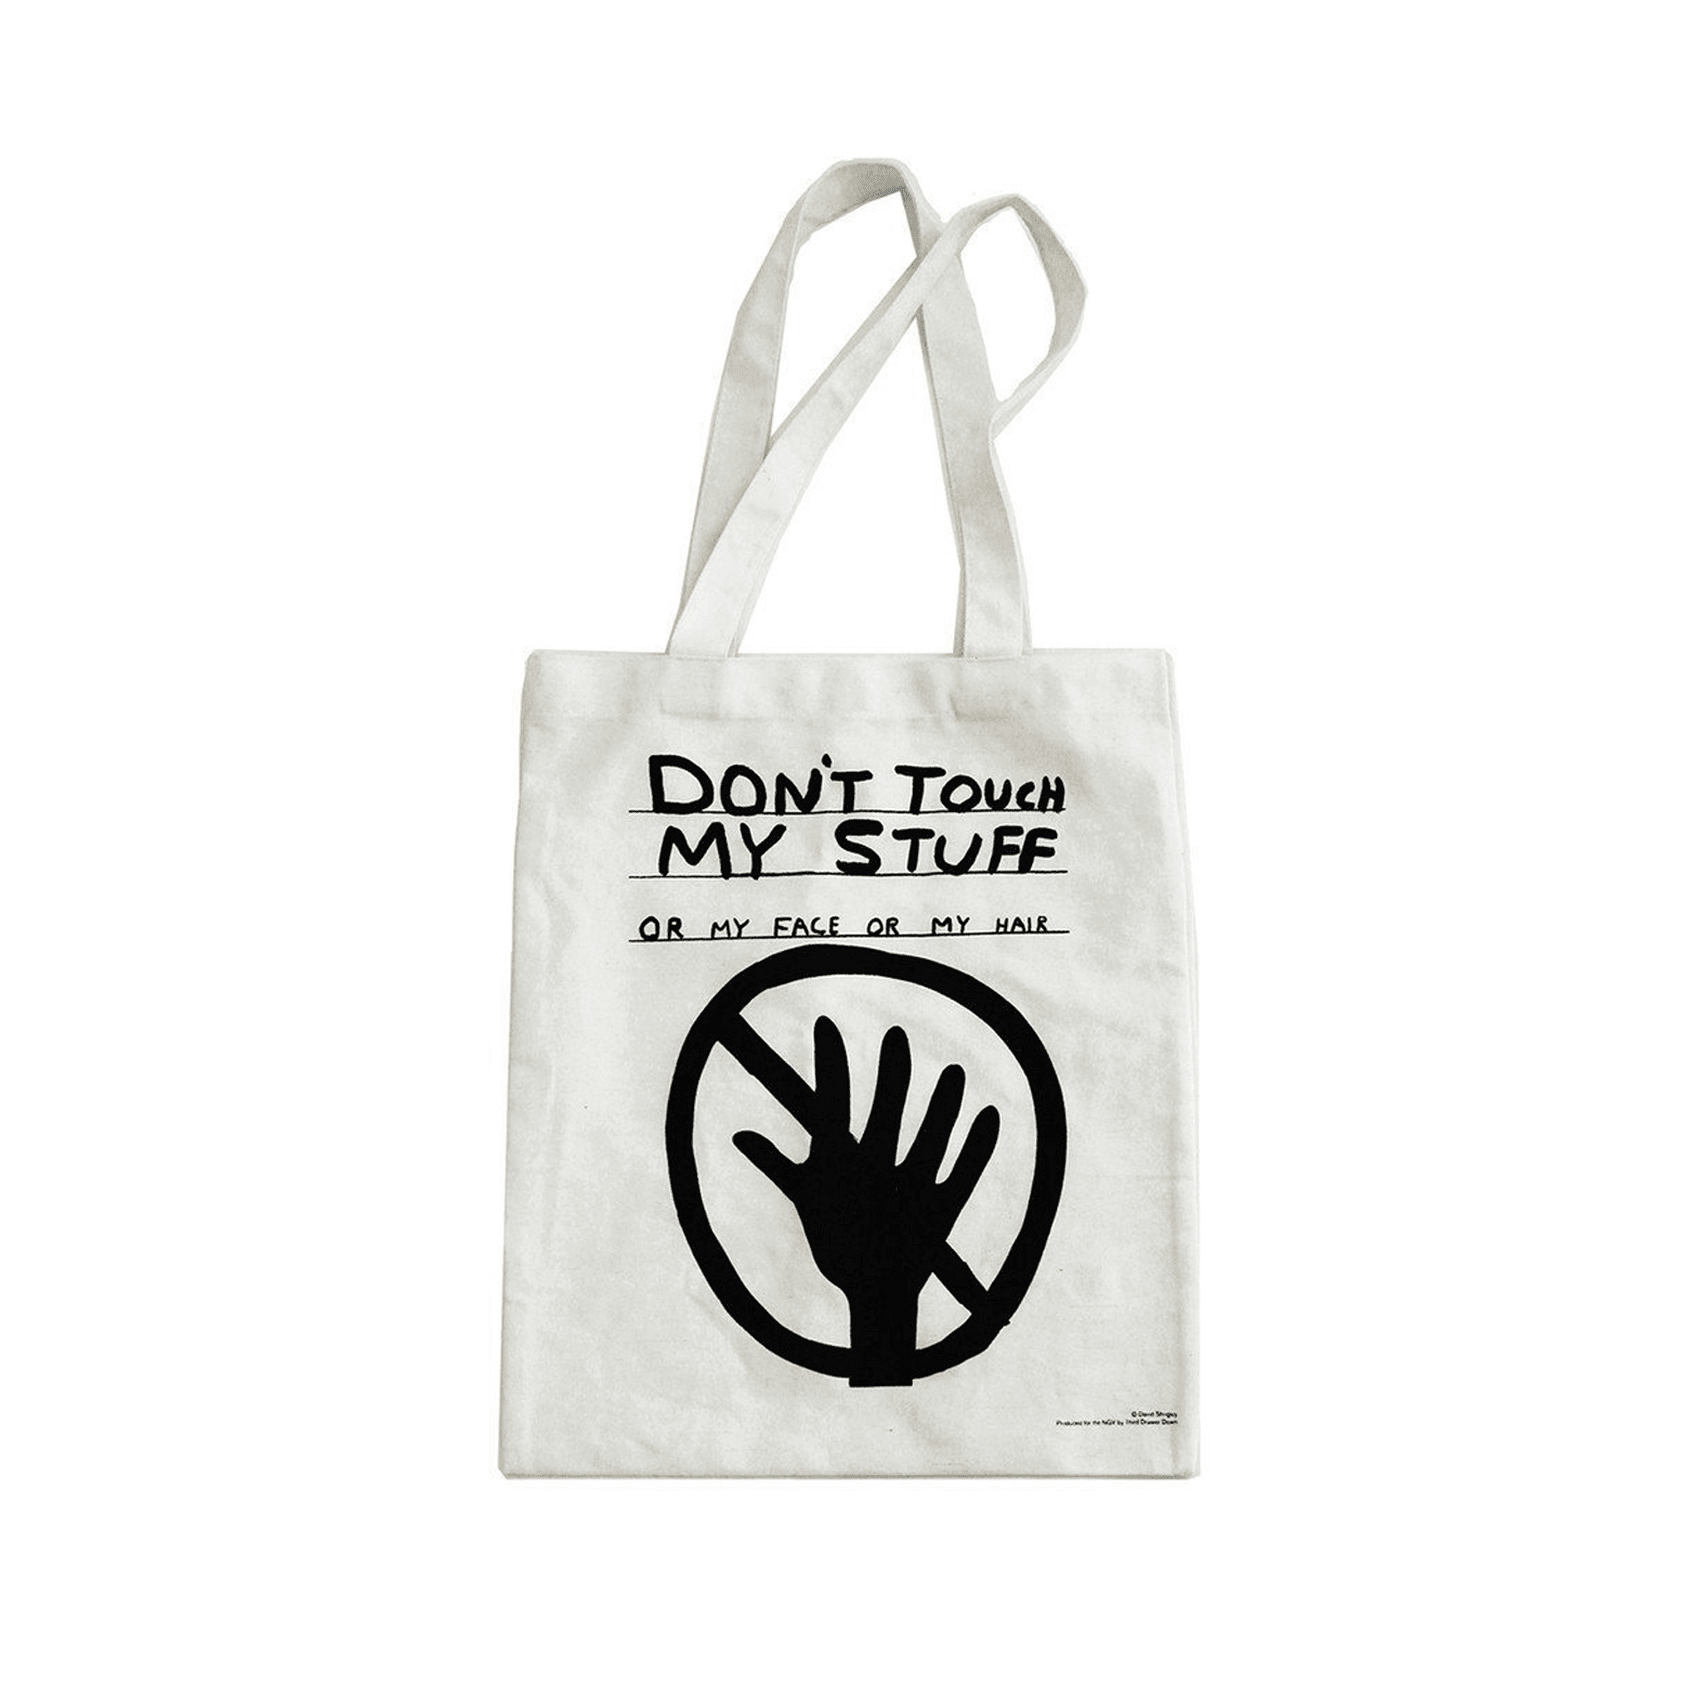 Don't Touch My Stuff Tote Bag x David Shrigley